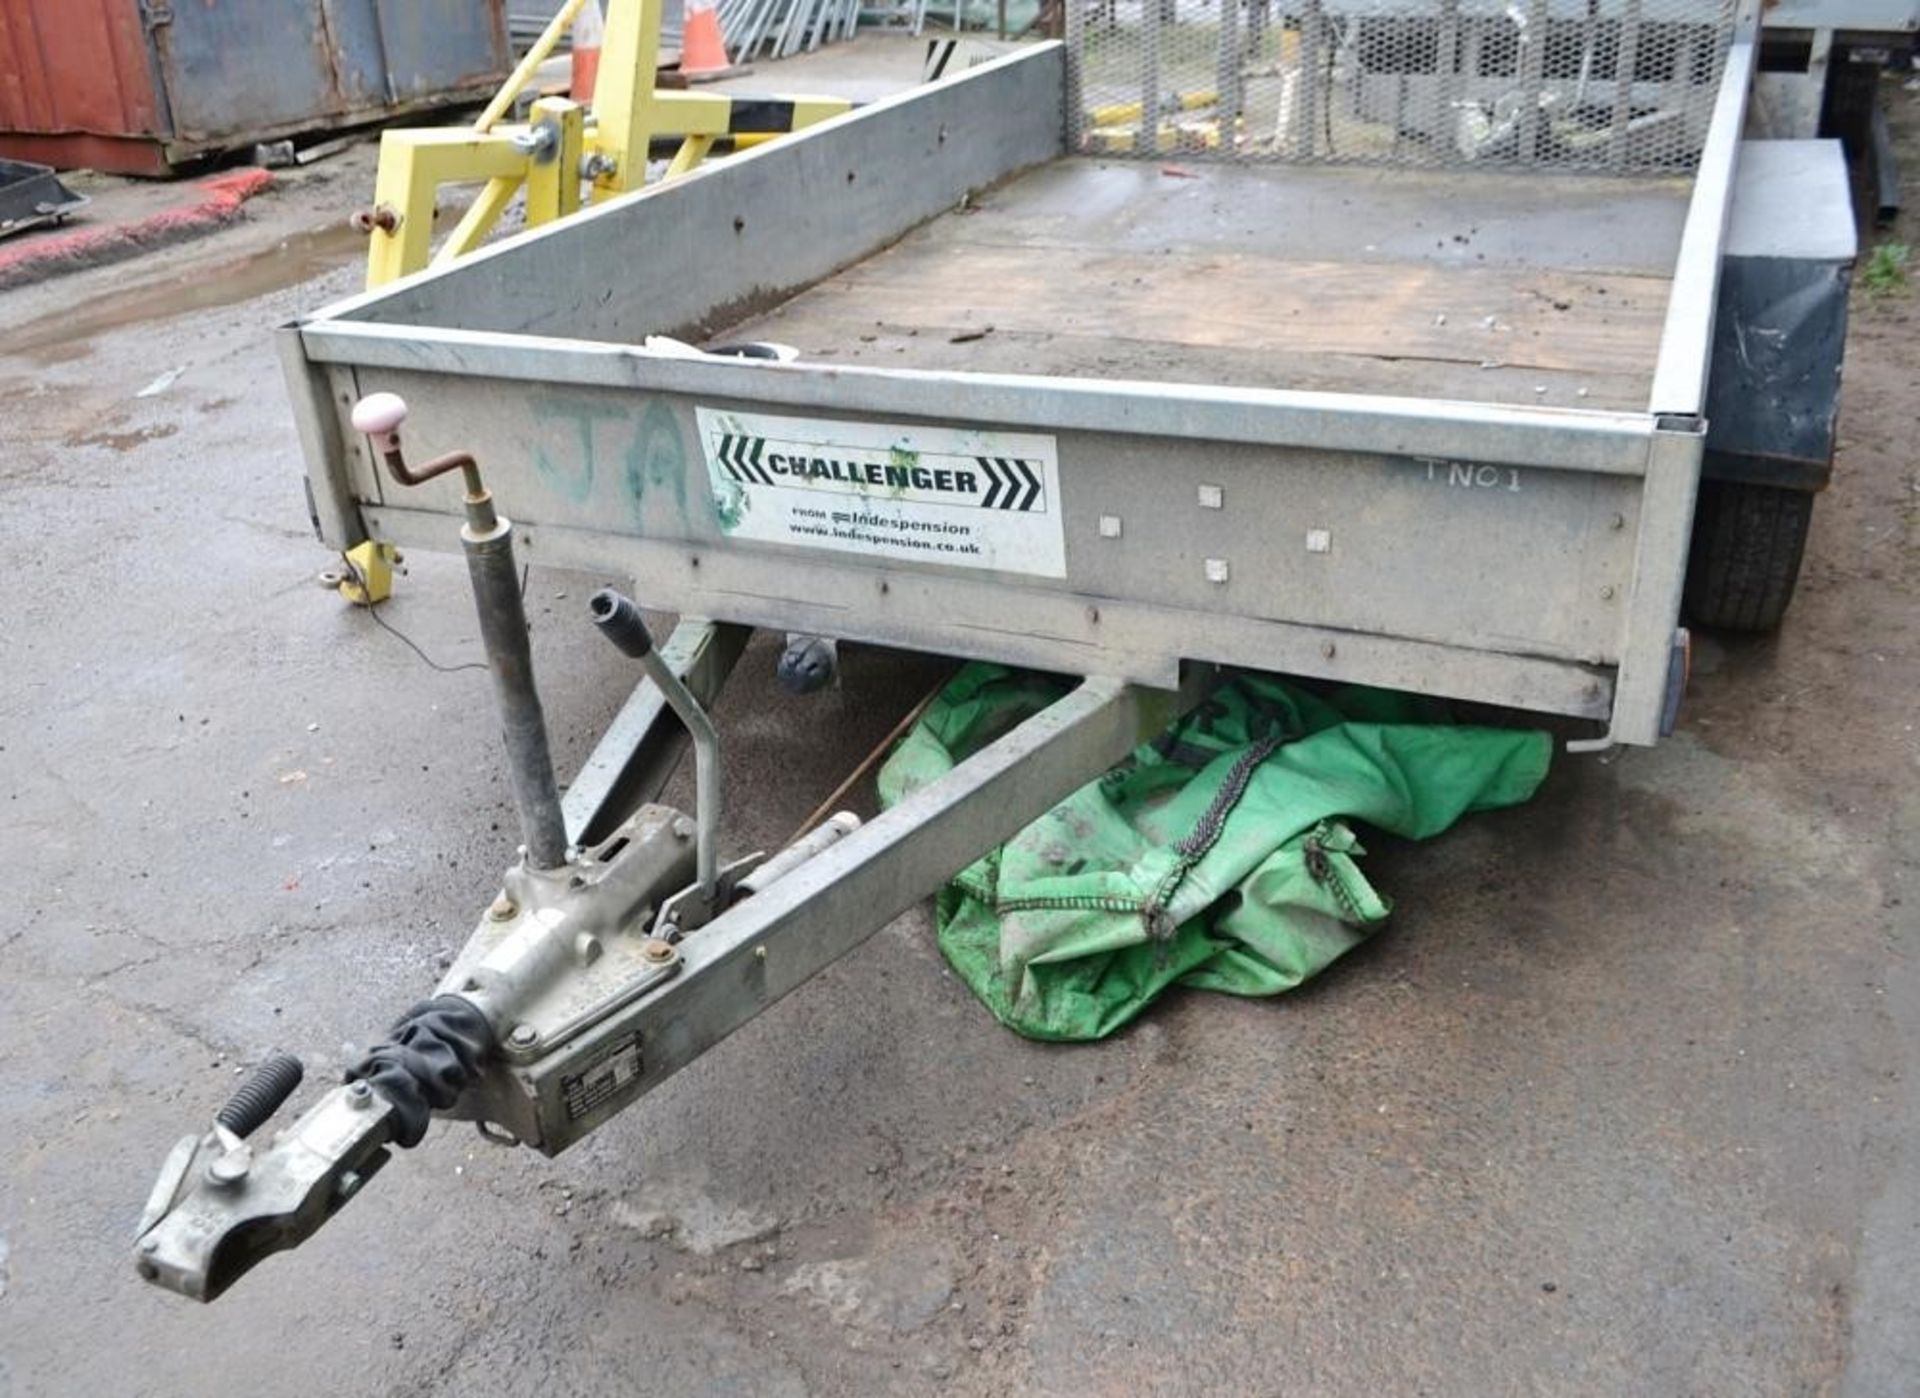 1 x Challenger Indespension 10ft Trailer With 2300Kg Gross Weight - CL464 - Location:Liverpool L19 - Image 20 of 25